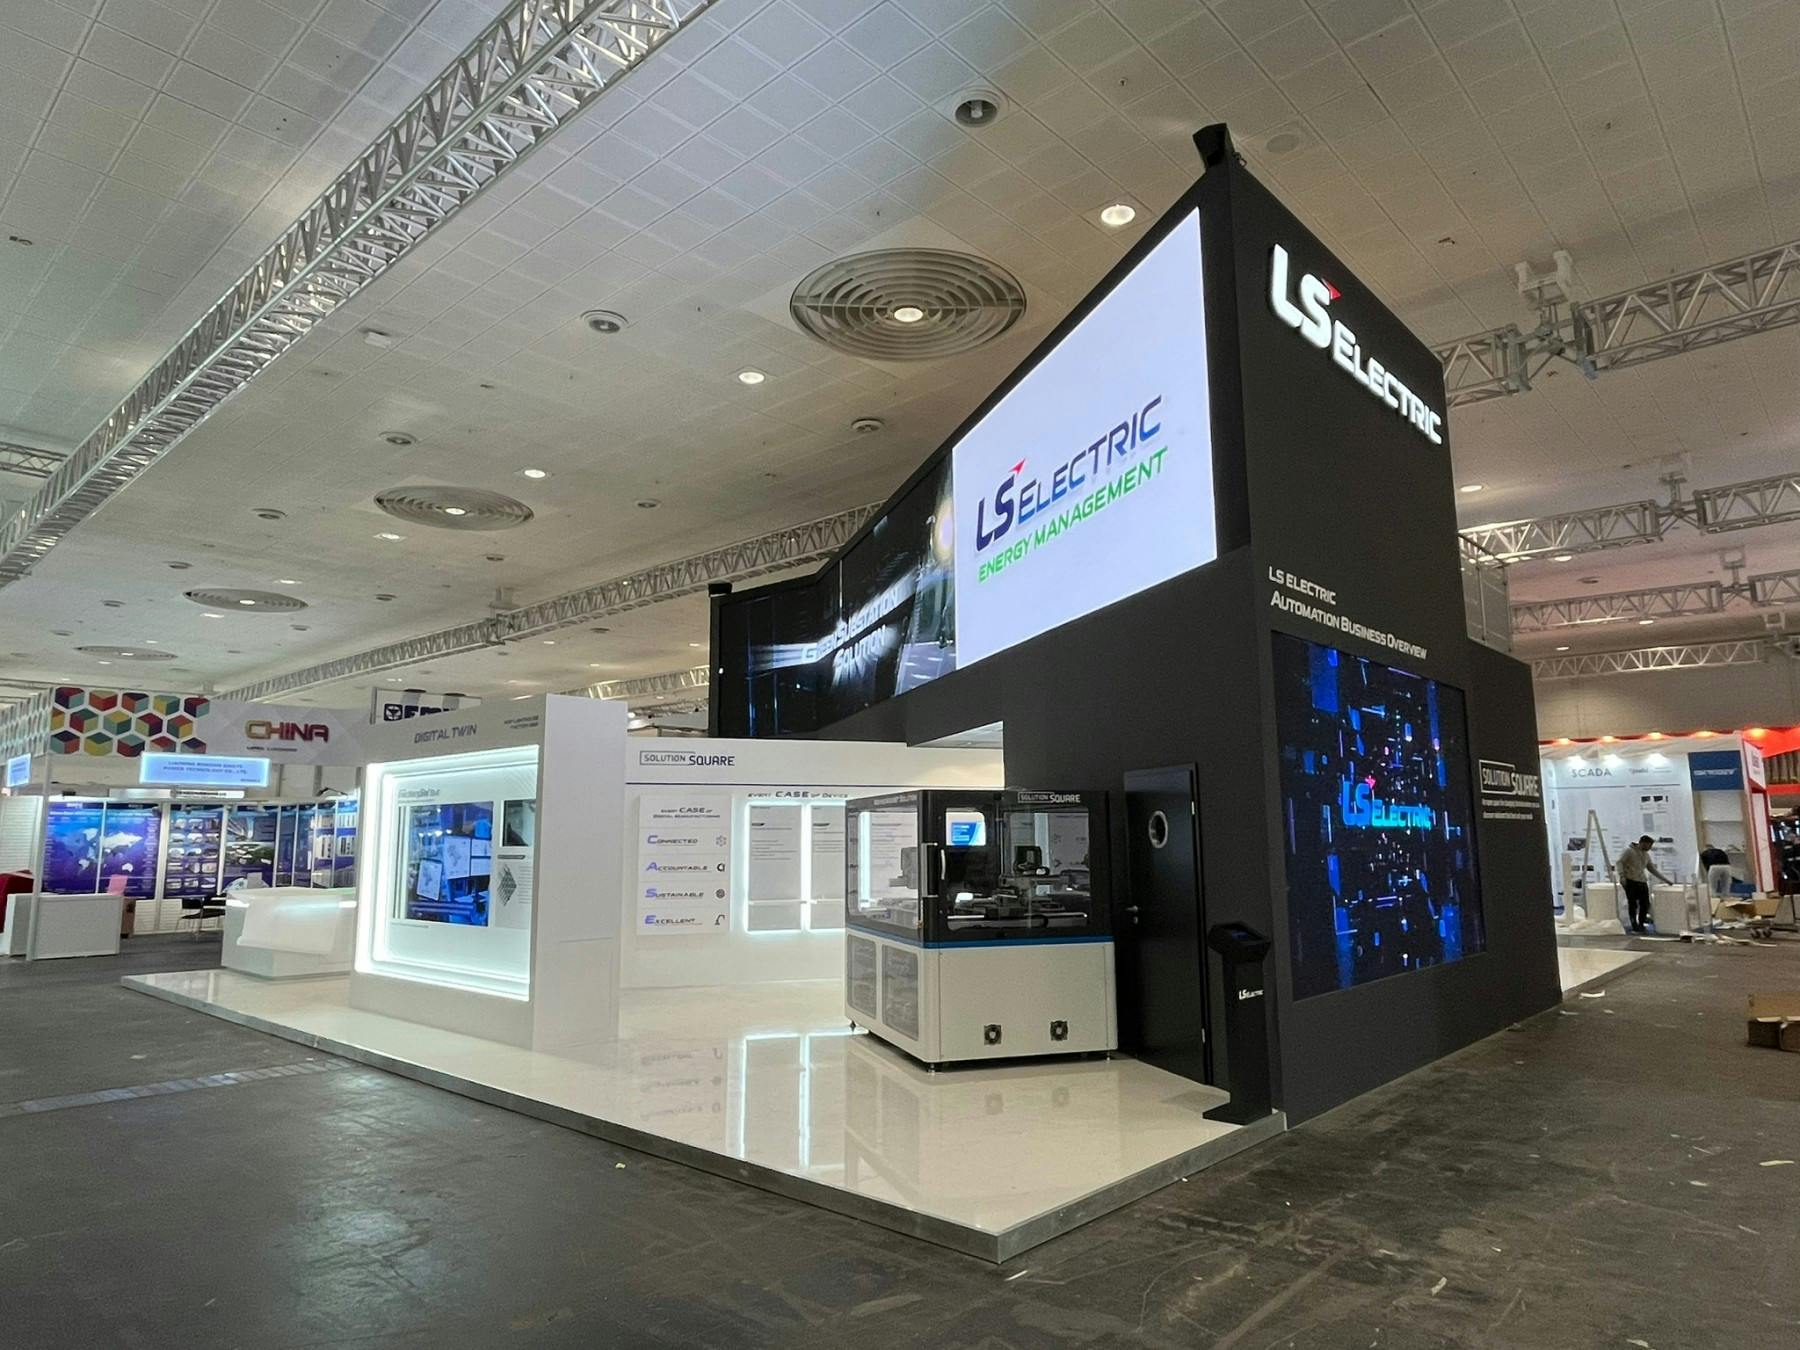 Outside view of exhibition booth by MDL expo.